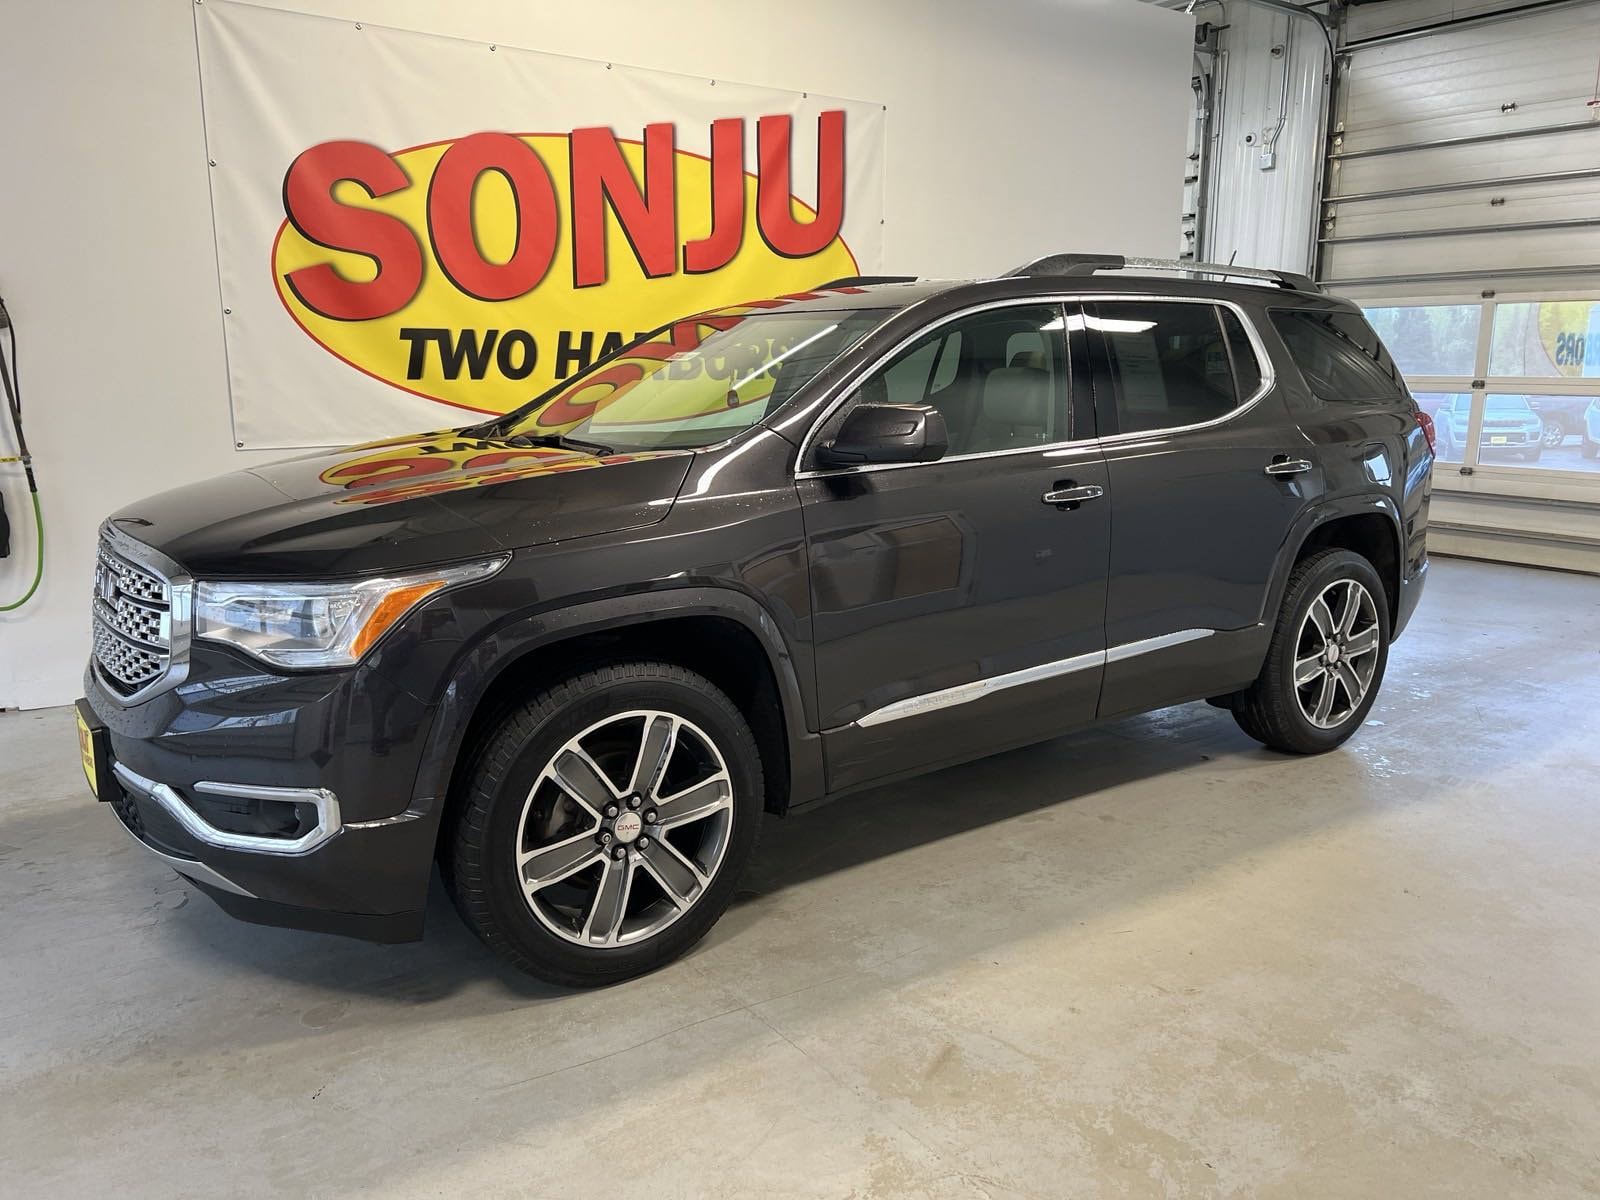 Used 2017 GMC Acadia Denali with VIN 1GKKNXLSXHZ282255 for sale in Two Harbors, Minnesota